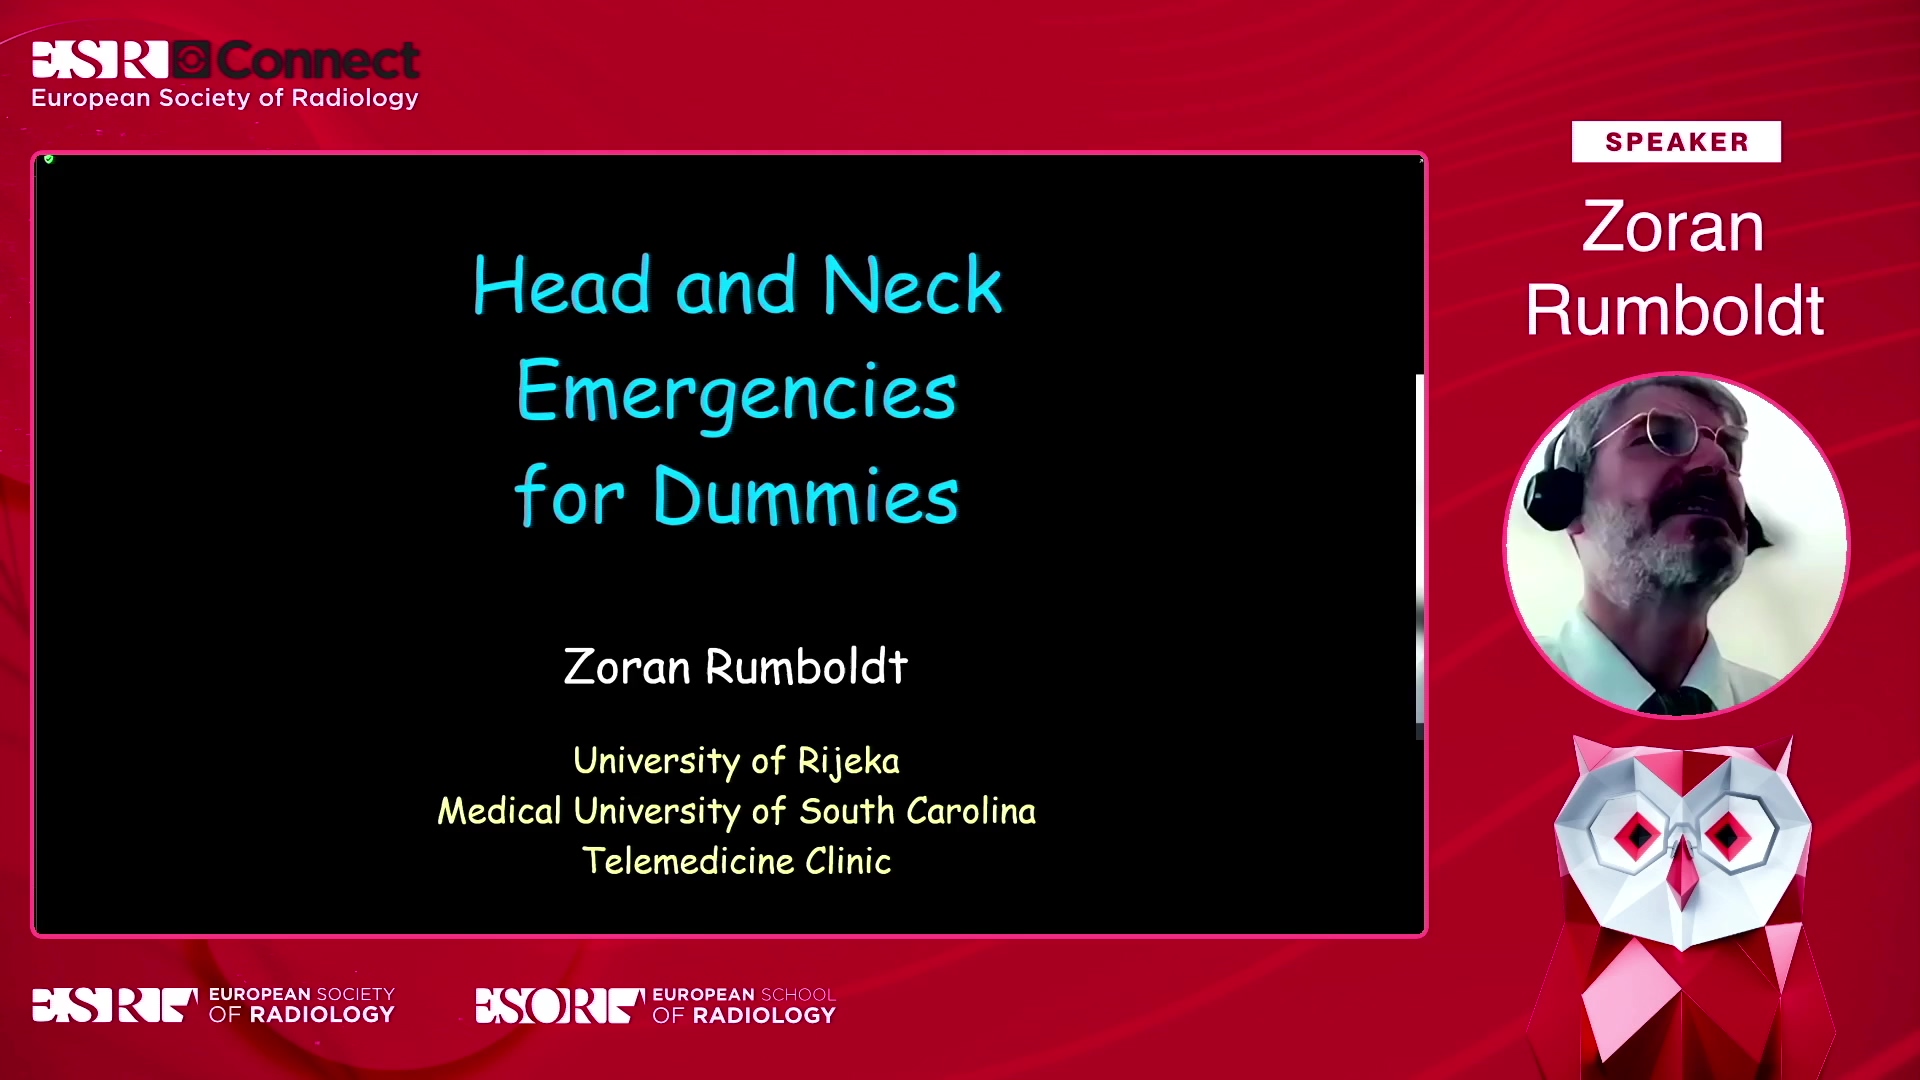 Head and neck emergencies for dummies